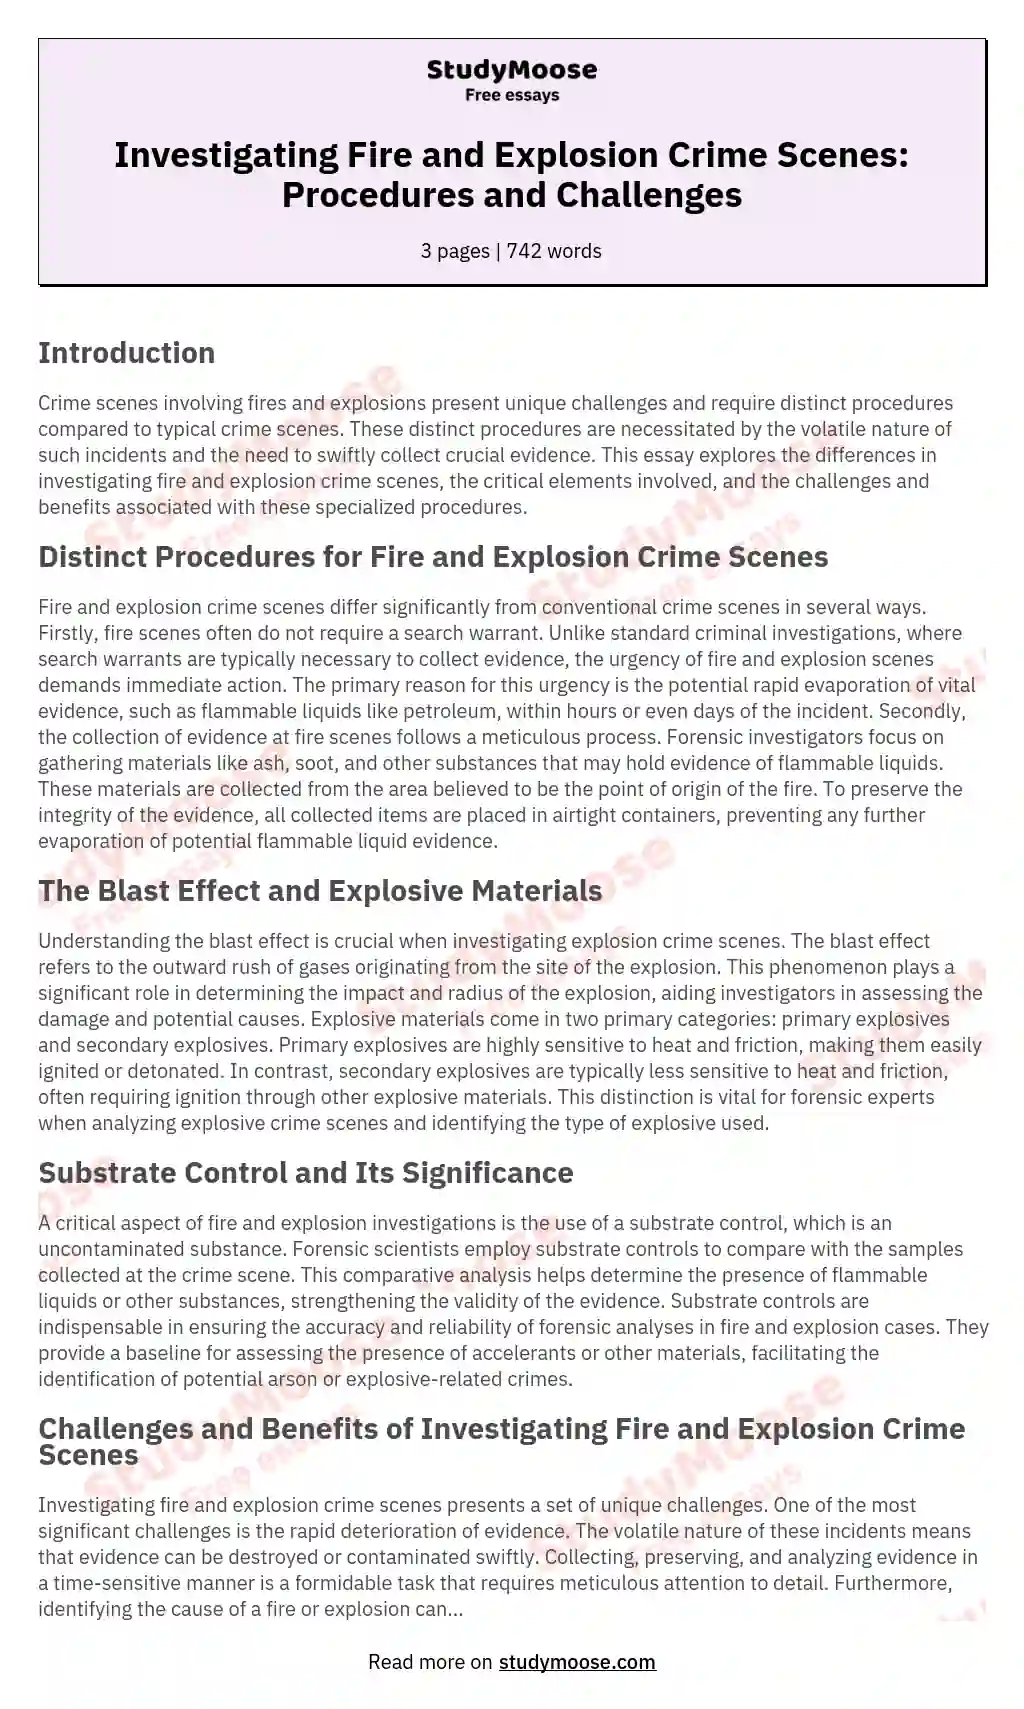 Investigating Fire and Explosion Crime Scenes: Procedures and Challenges essay